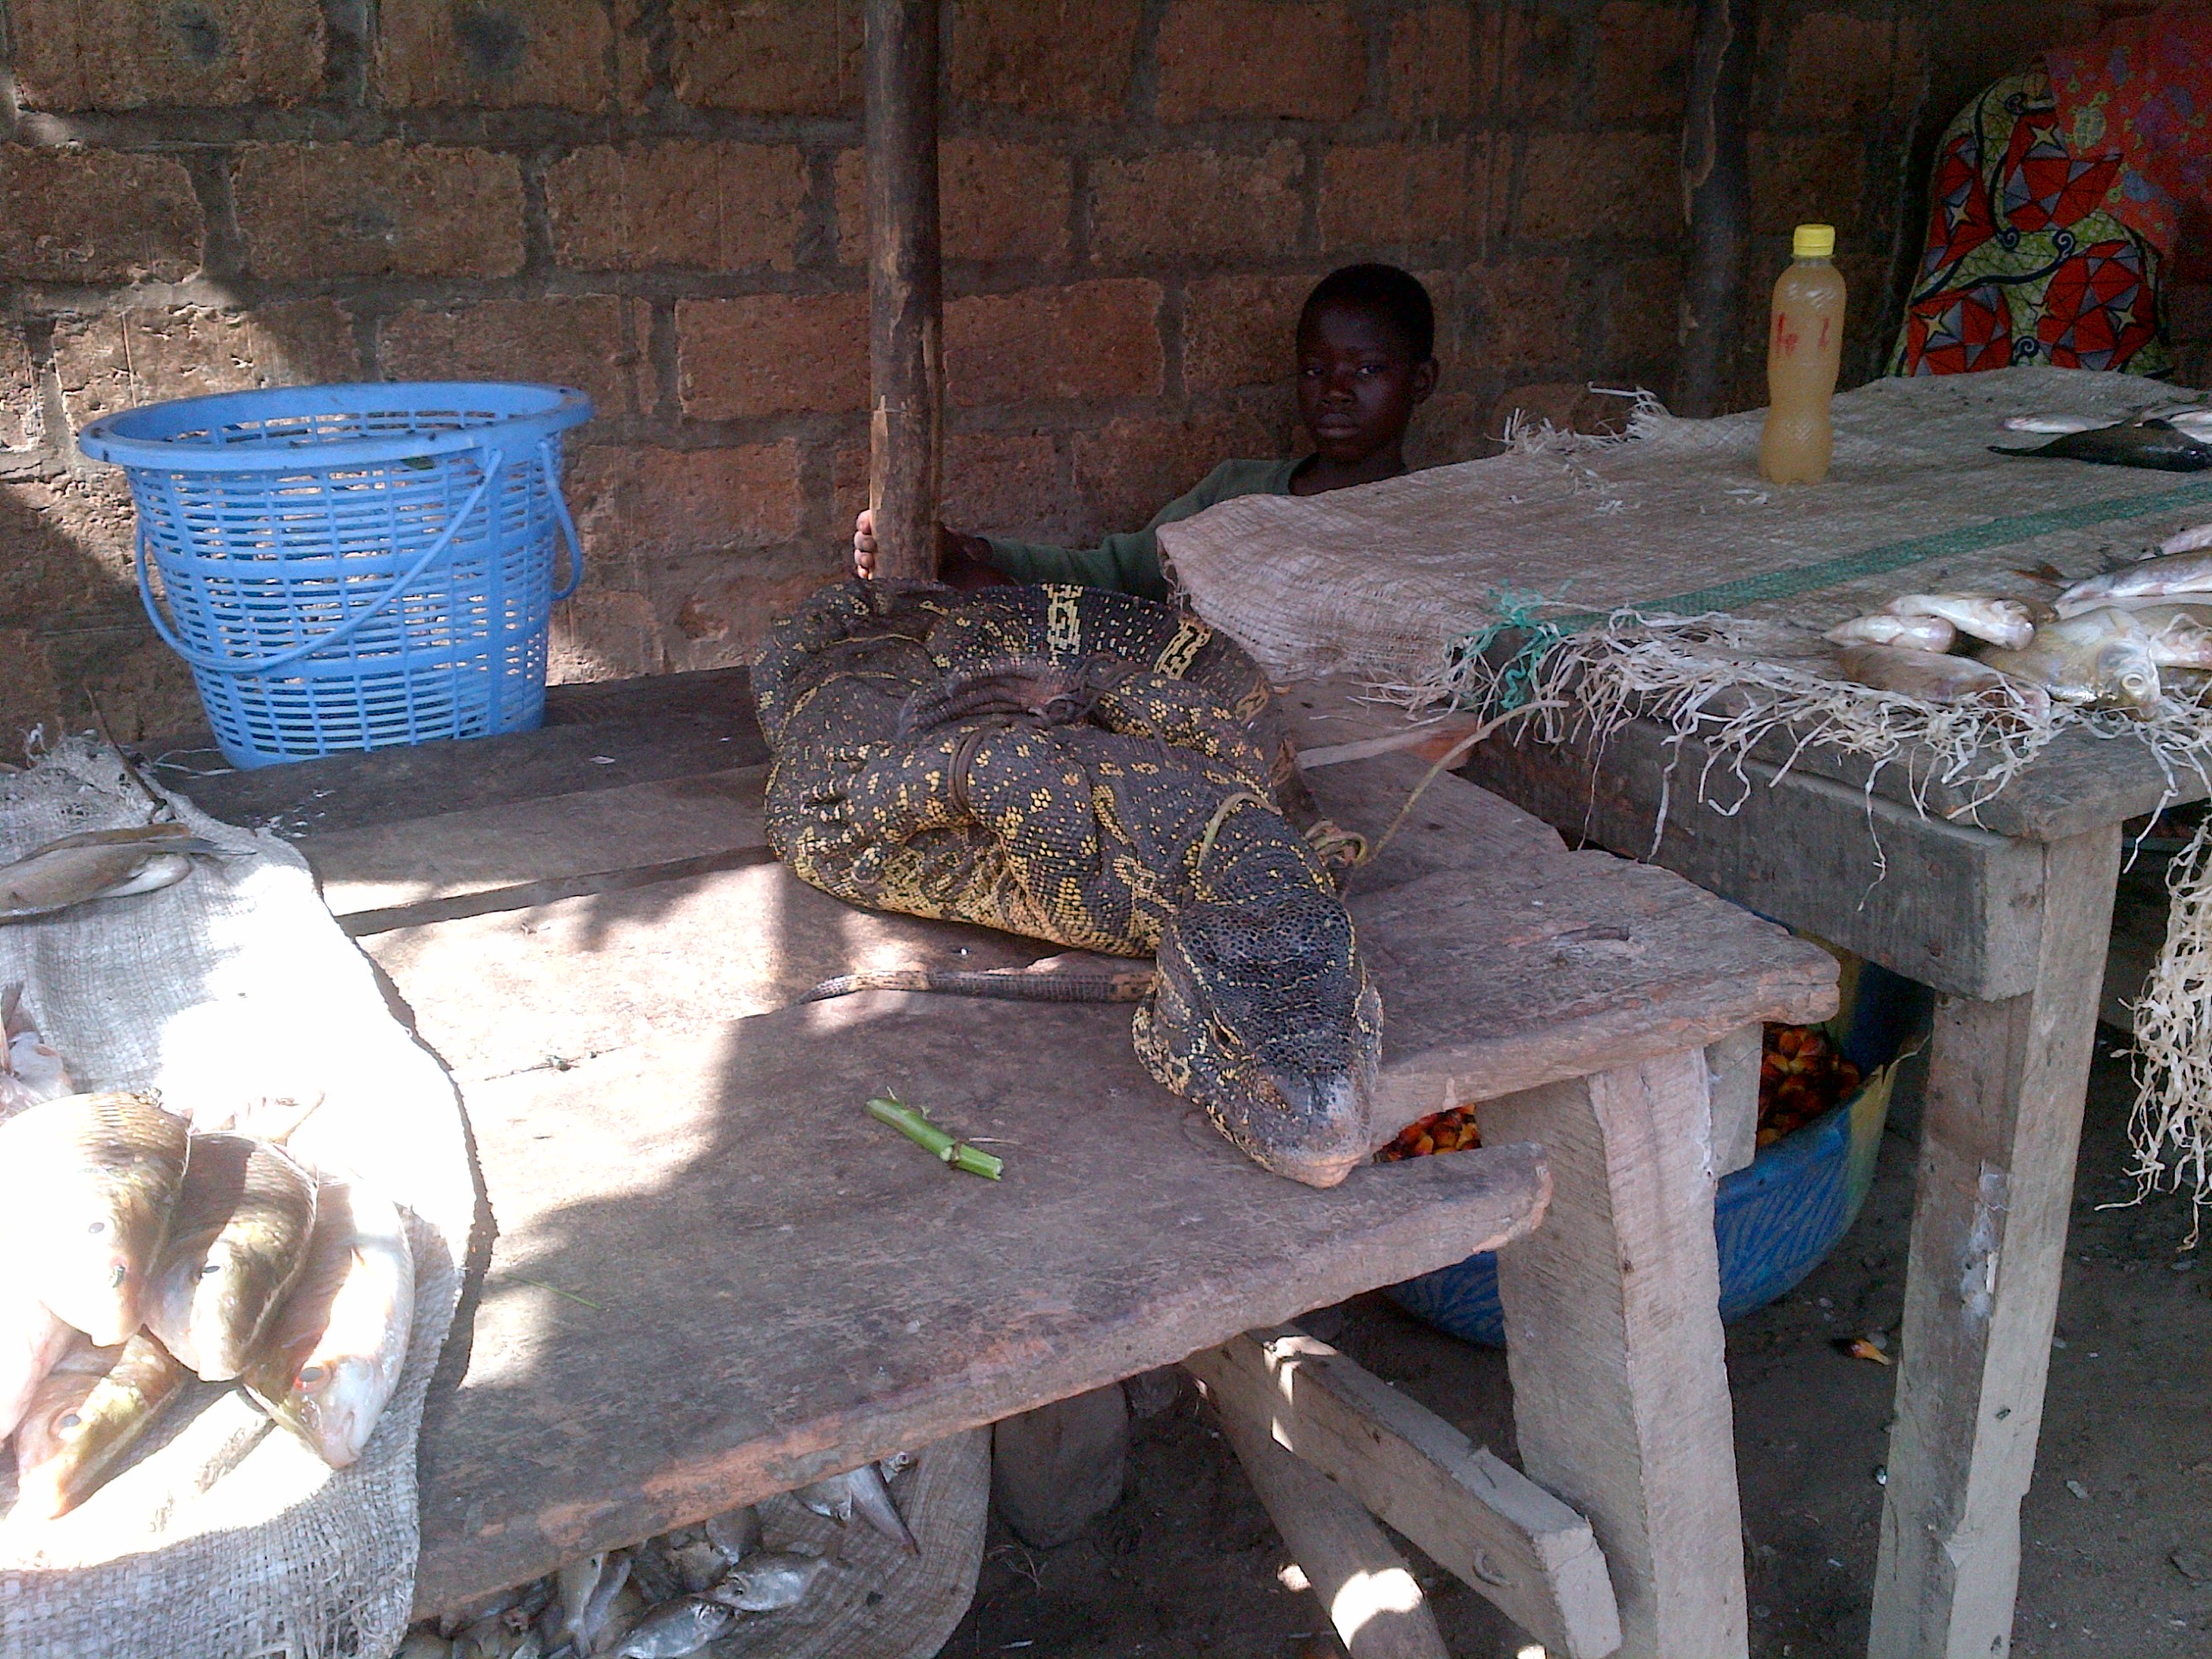 Lizard for sale at the meat market